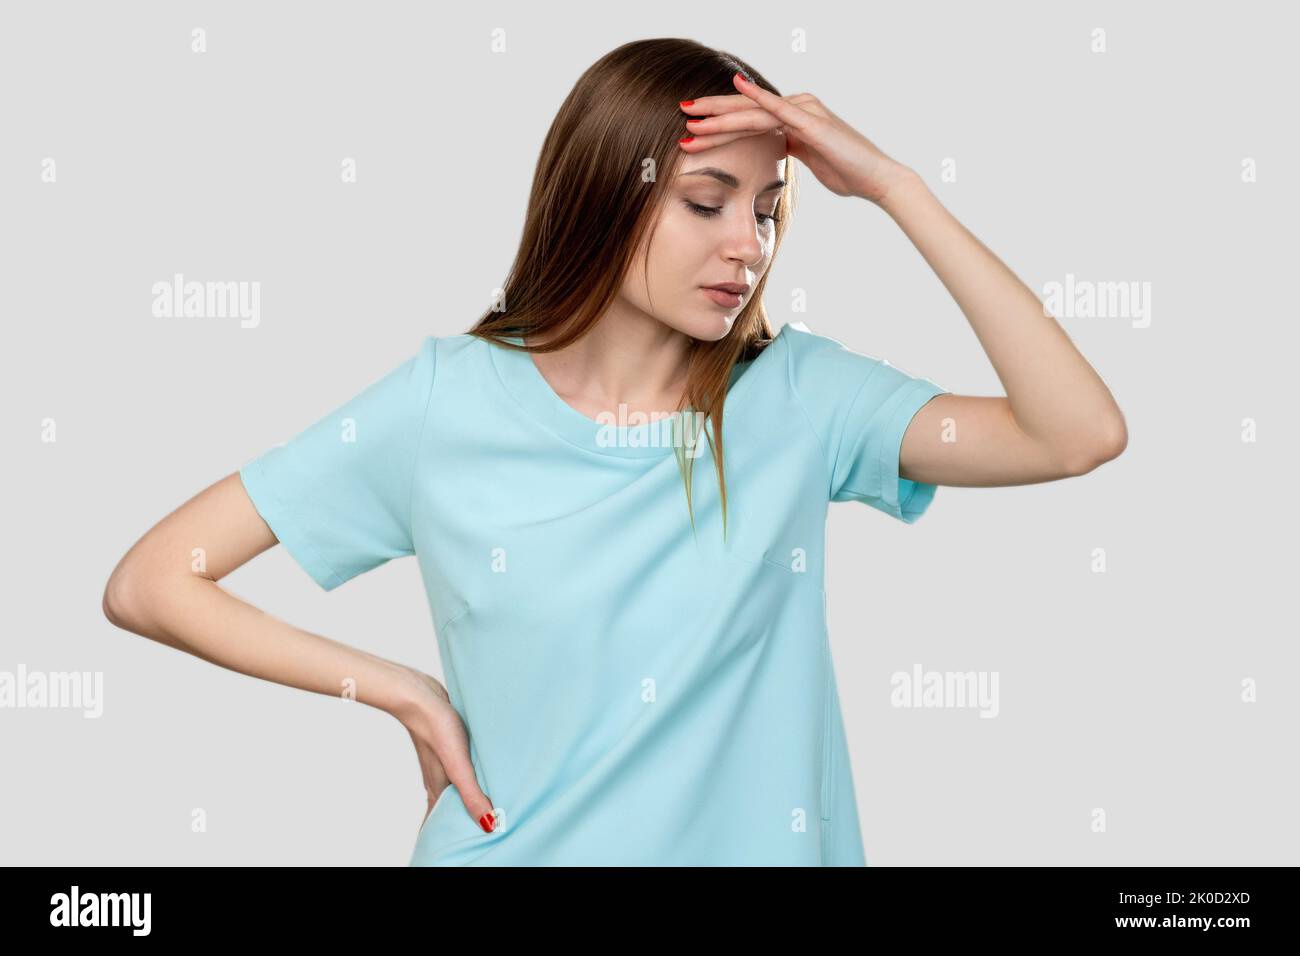 stressed out woman panic attack depressed headache Stock Photo